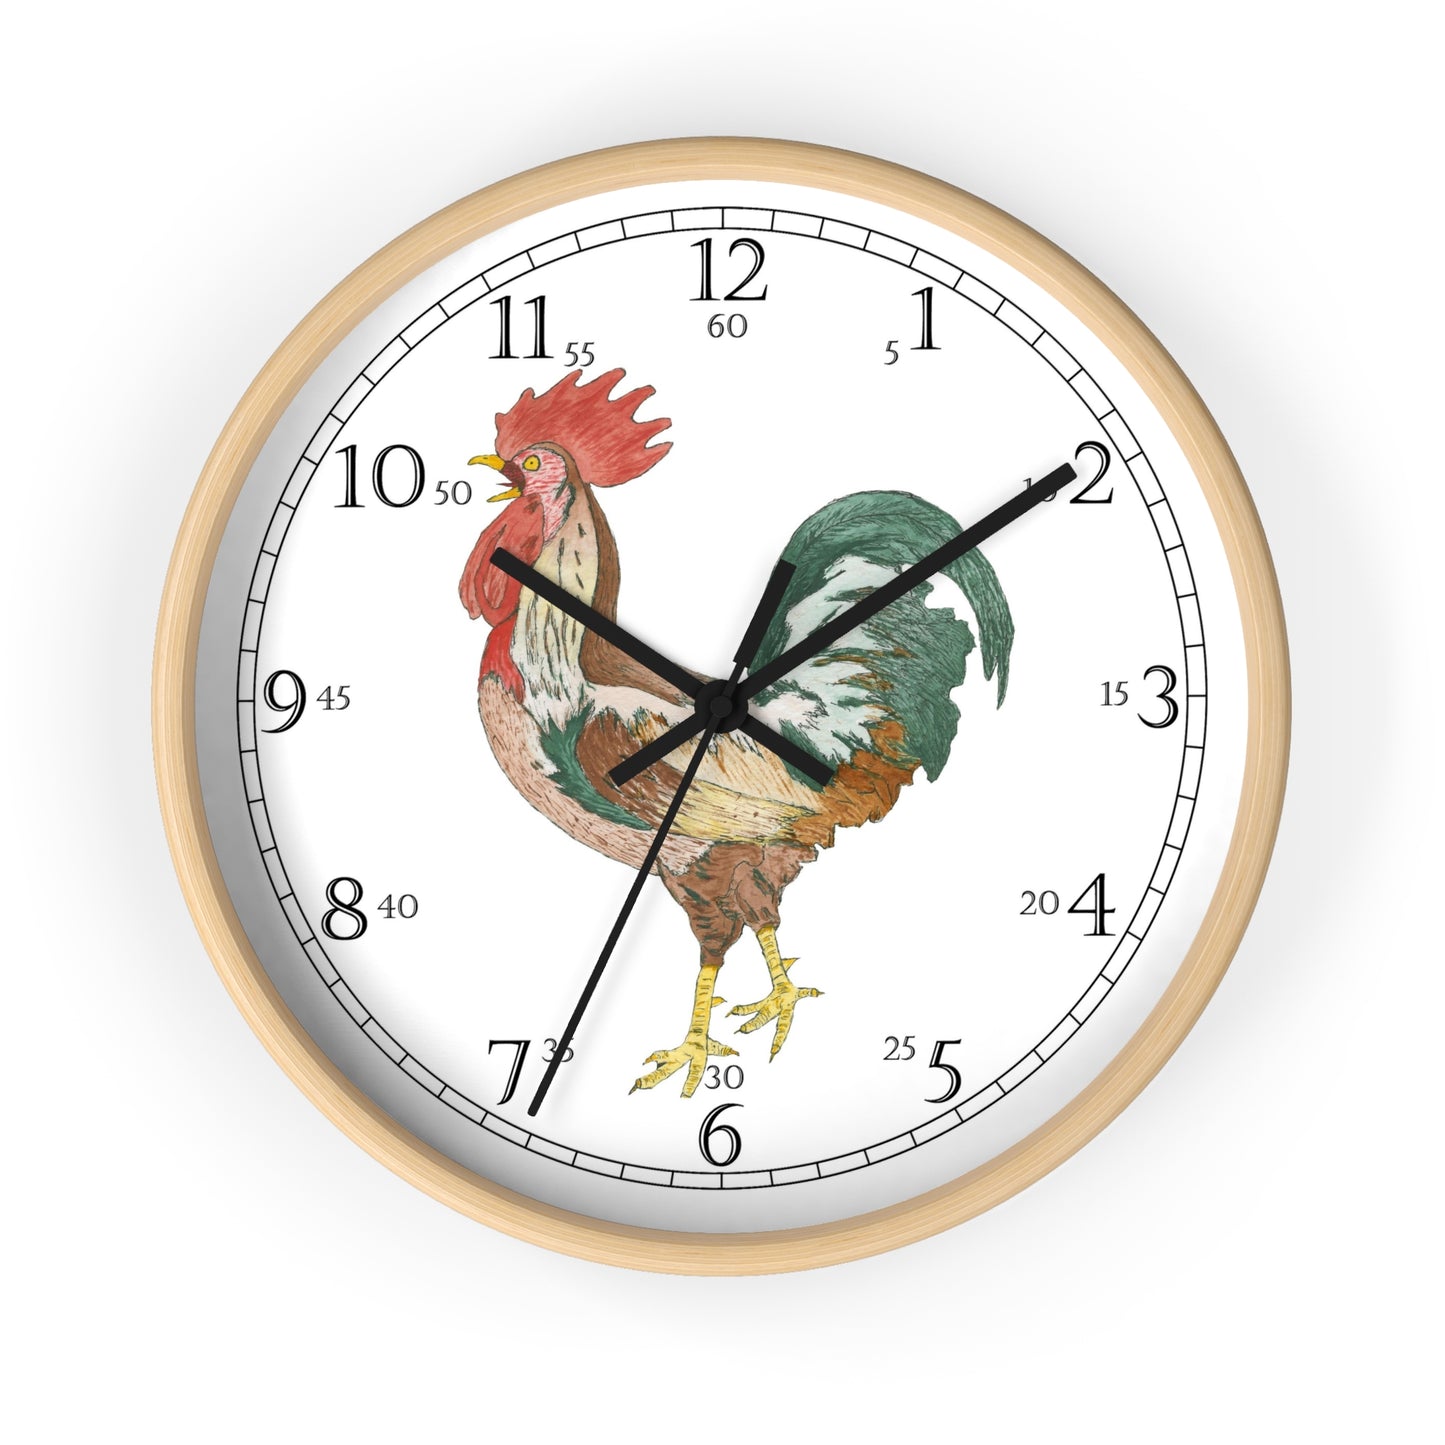 Joseph Rooster English Numeral Clock